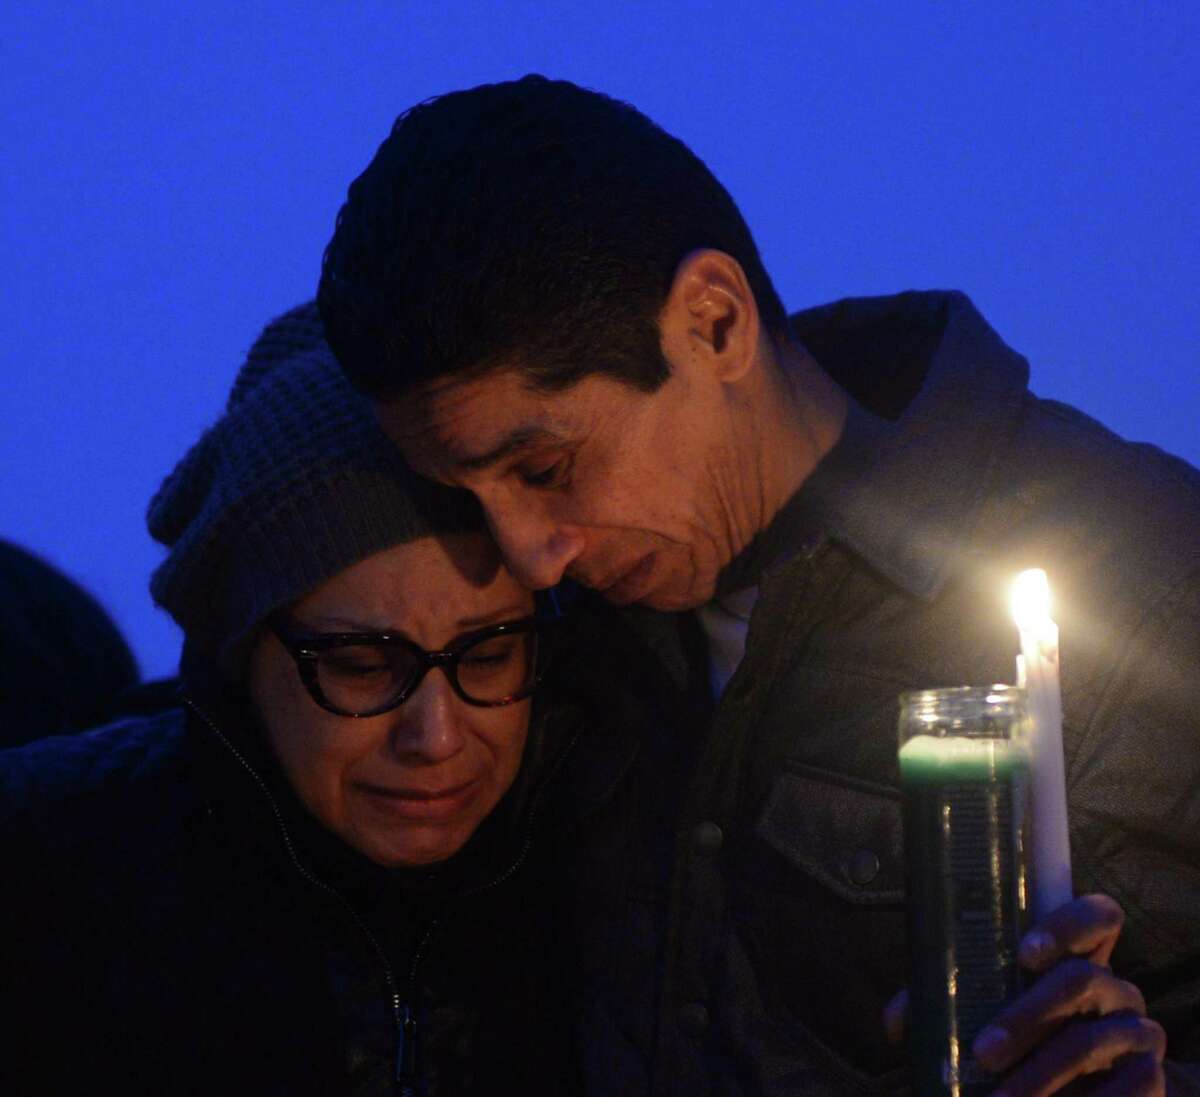 Friends and family grieve for homicide victim Valerie Reyes during a candleight vigil in her honor at Glen Island Park in New Rochelle, N.Y. Thursday, Feb. 7, 2019. Reyes, 24, of New Rochelle, N.Y., was found bound inside of a suitcase just off of Glenville Road in a quiet, wooded area of Greenwich, Conn. on Tuesday morning.